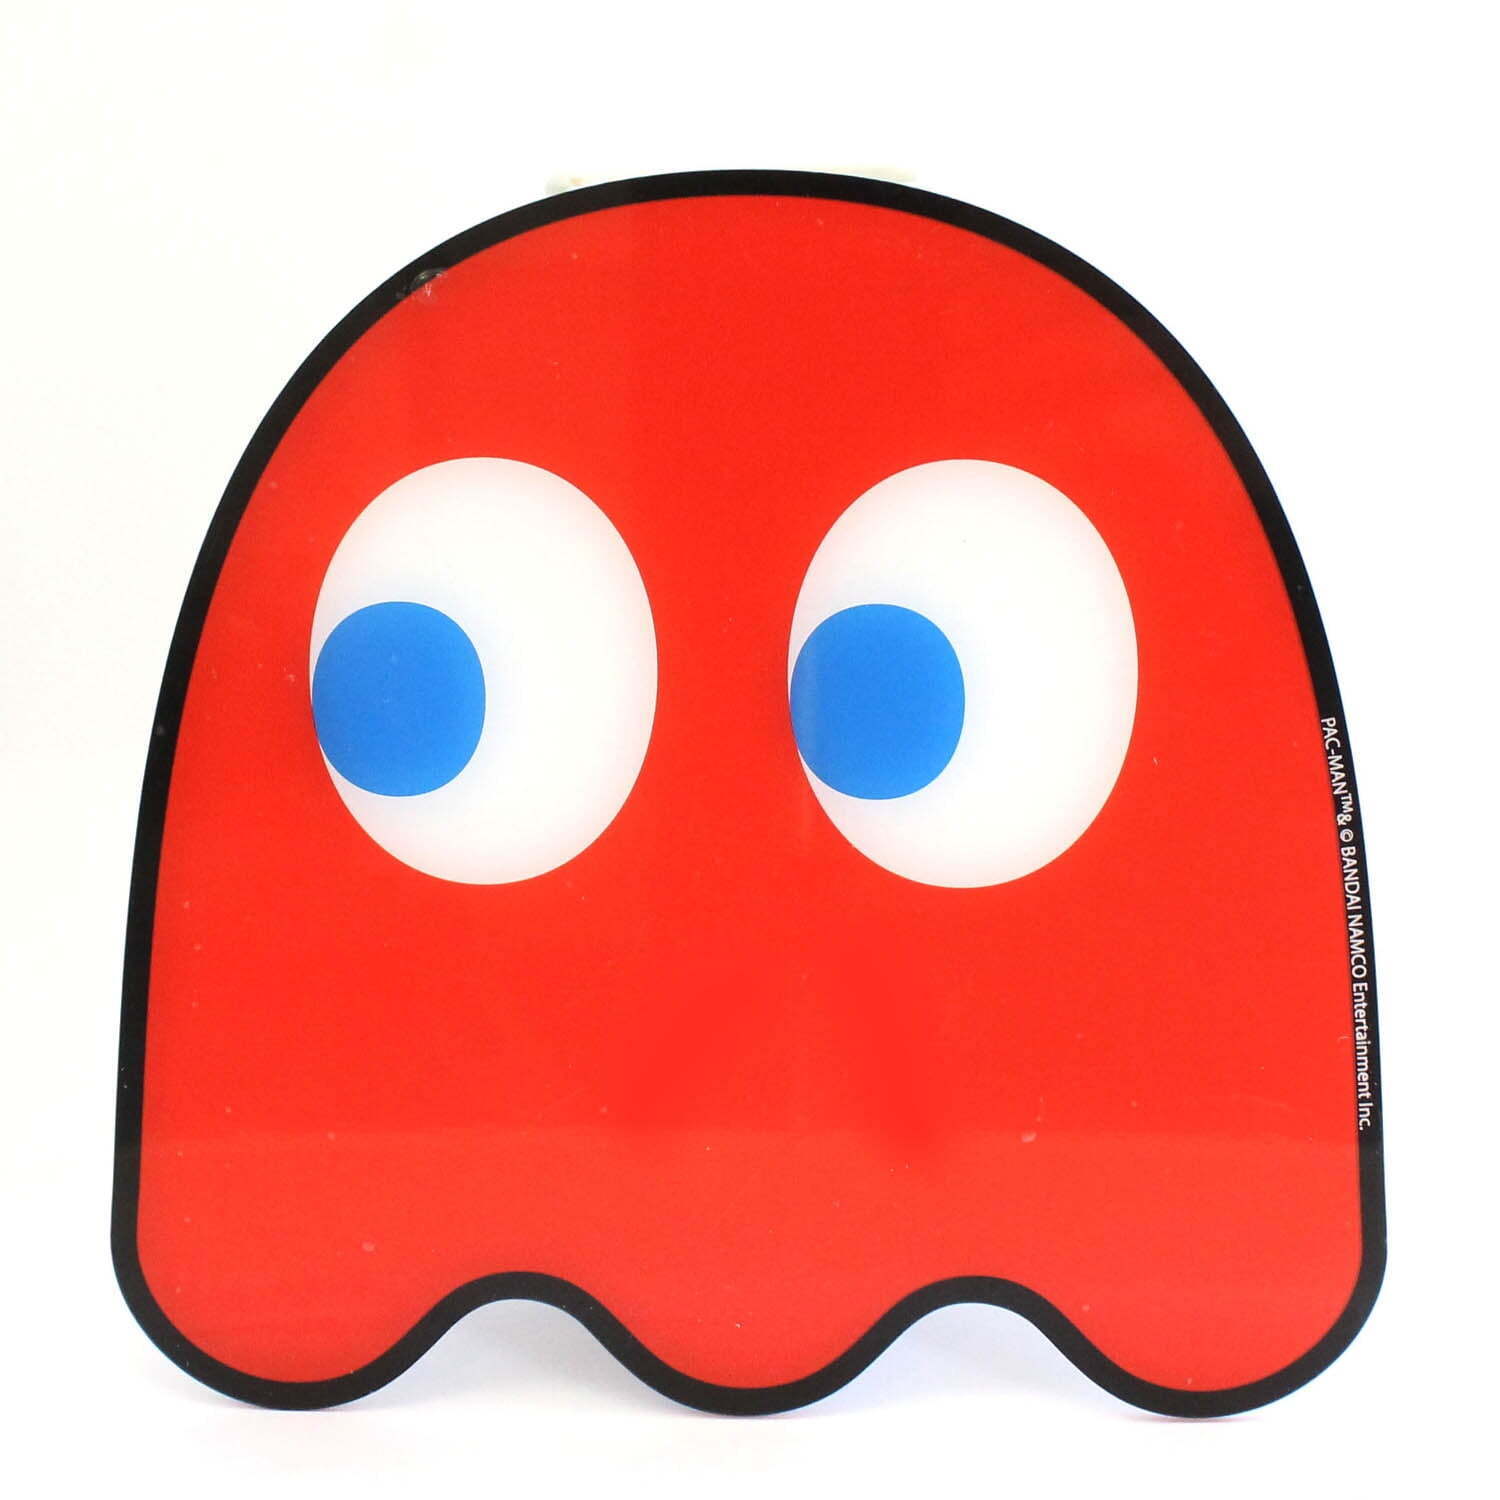 Pac-Man Red Ghost Silhouette Light